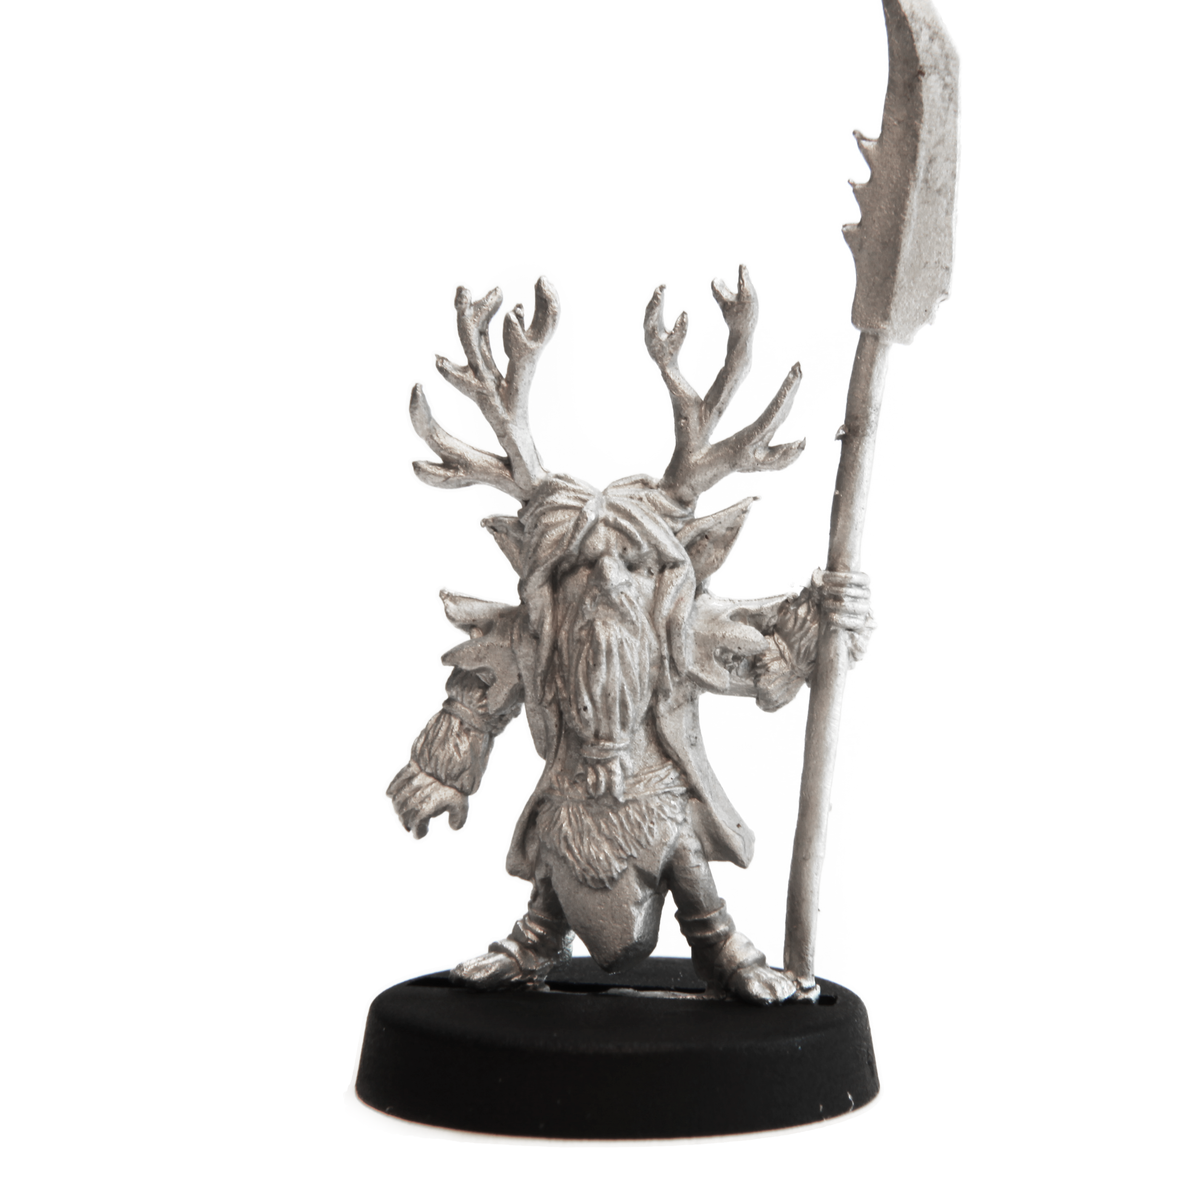 Gnome Druid - Fengles Dungeons and Dragons Miniature DnD is a